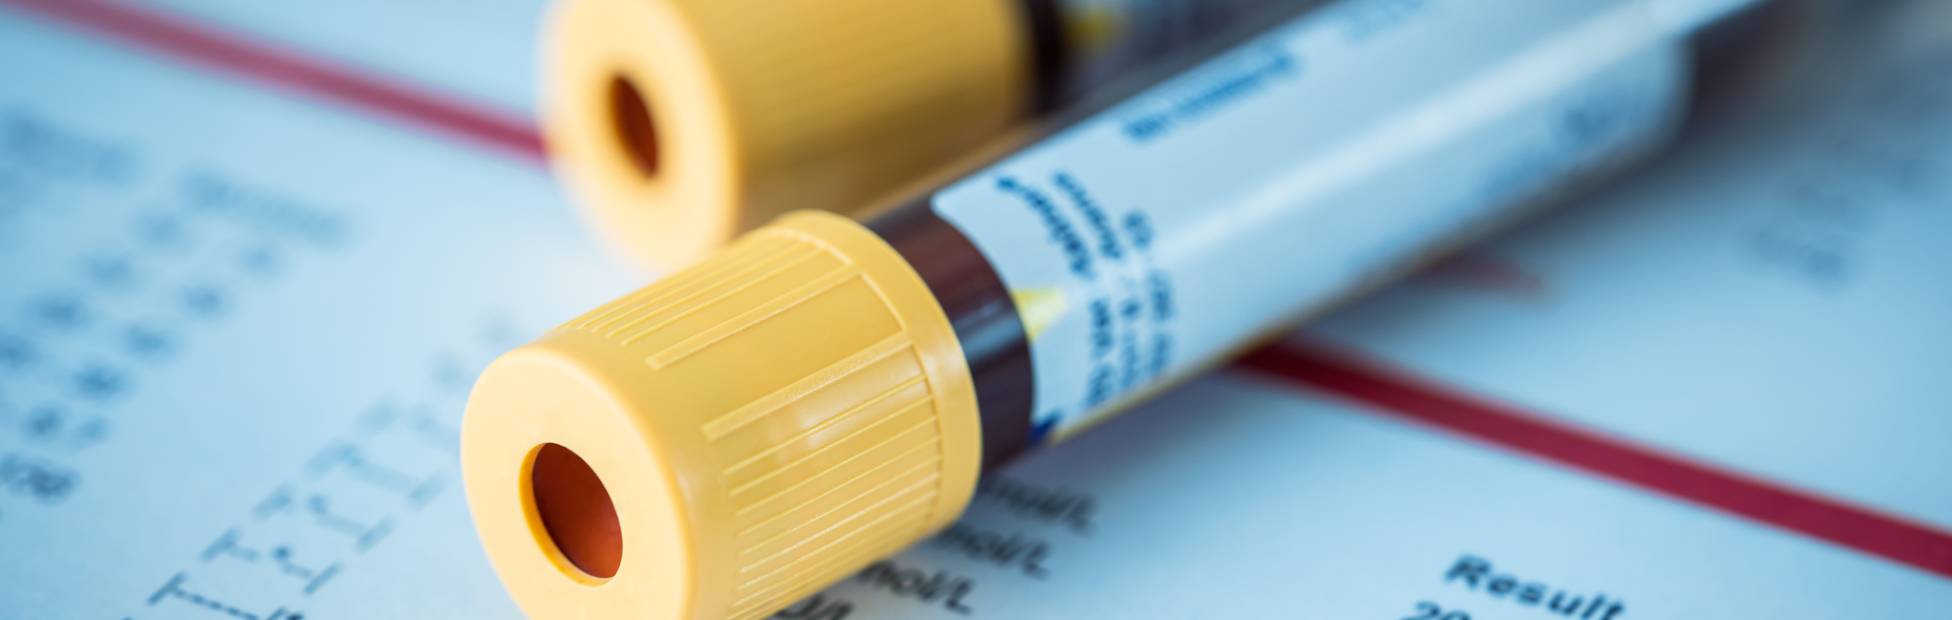 An image of two blood test tubes on top of a blood test result document.